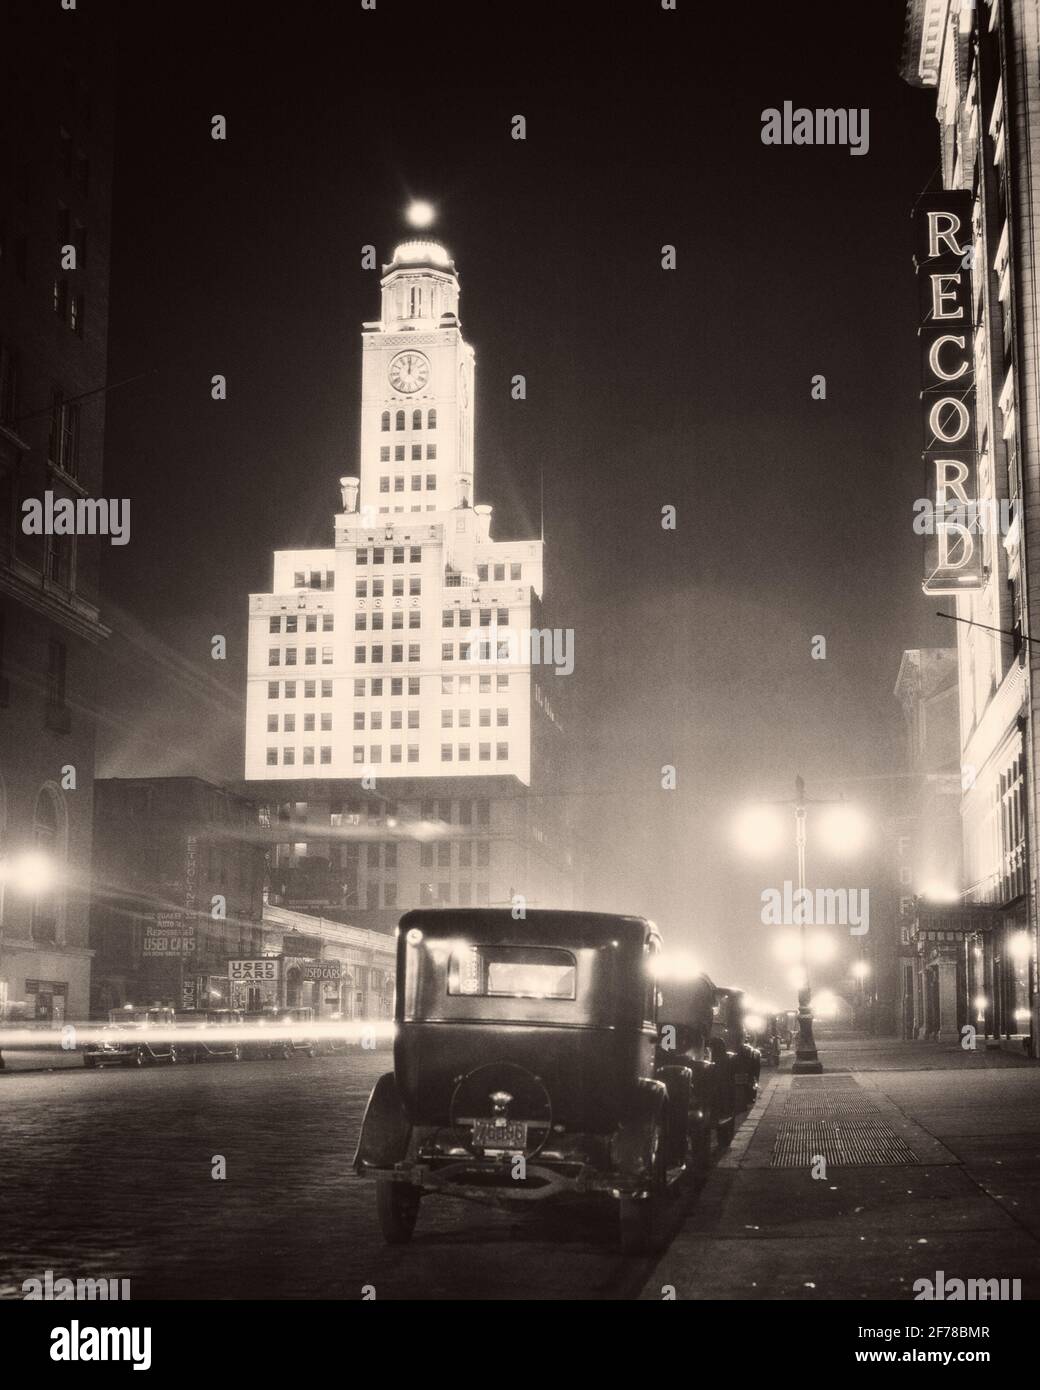 1930s NORTH BROAD STREET NIGHT LIGHTED ELVERSON BUILDING HOME OF THE INQUIRER & NEON FOR THE RECORD BUILDING PHILADELPHIA PA USA - q74160 CPC001 HARS AUTOS EXTERIOR LOW ANGLE PA BROAD REAL ESTATE COMMONWEALTH BROAD STREET STRUCTURES AUTOMOBILES CITIES FOURTH ESTATE KEYSTONE STATE VEHICLES EDIFICE STREET LAMPS NIGHTTIME BLACK AND WHITE CITY OF BROTHERLY LOVE LAMPPOSTS LIGHTED OLD FASHIONED Stock Photo